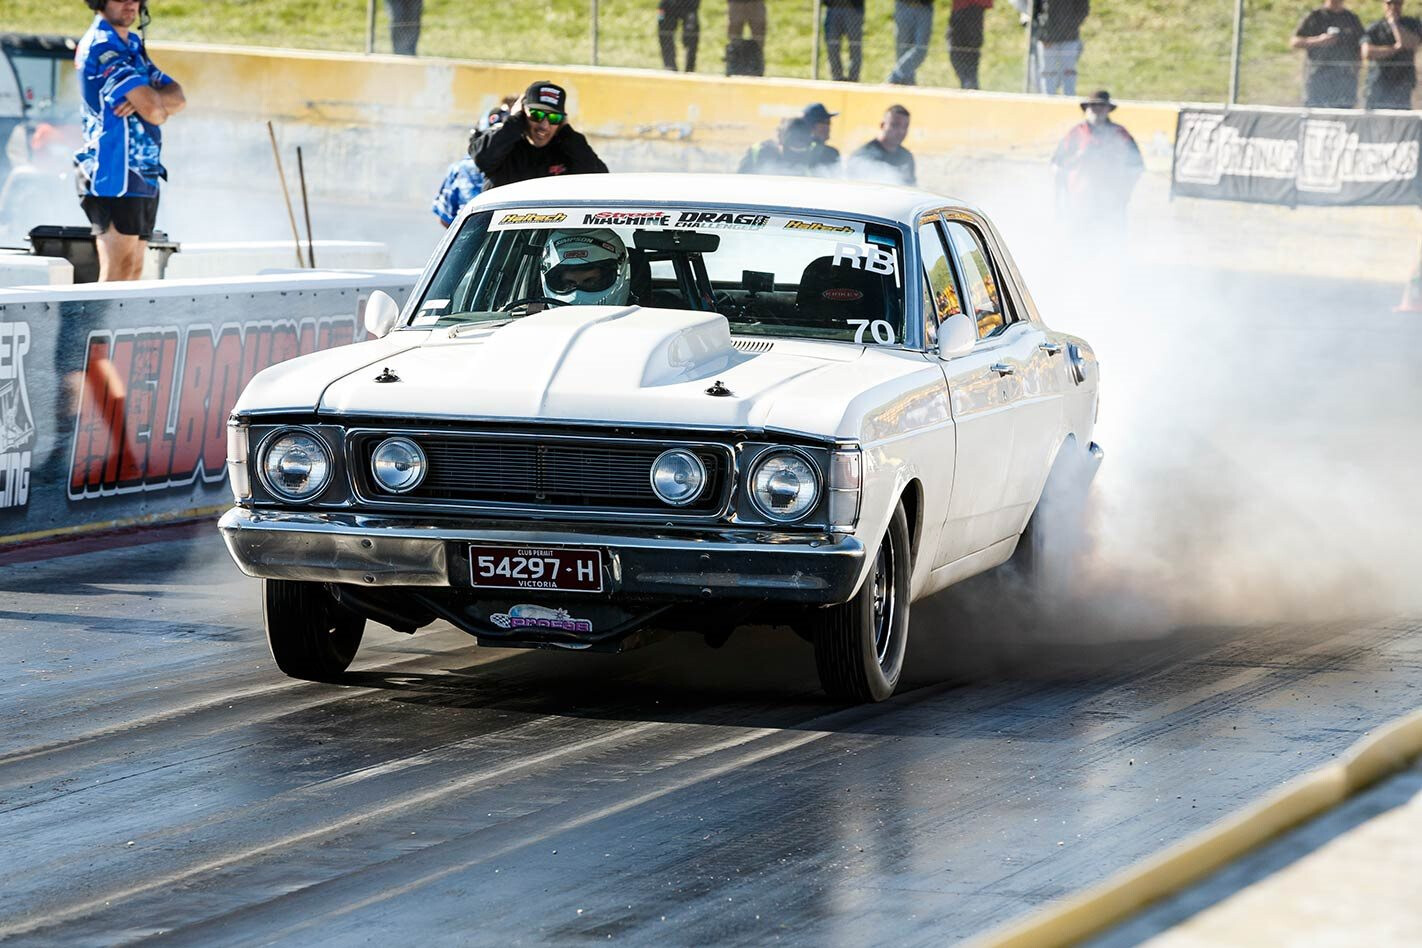 Frank Marchese’s 200mph XW Fairmont takes out Drag Challenge 2018